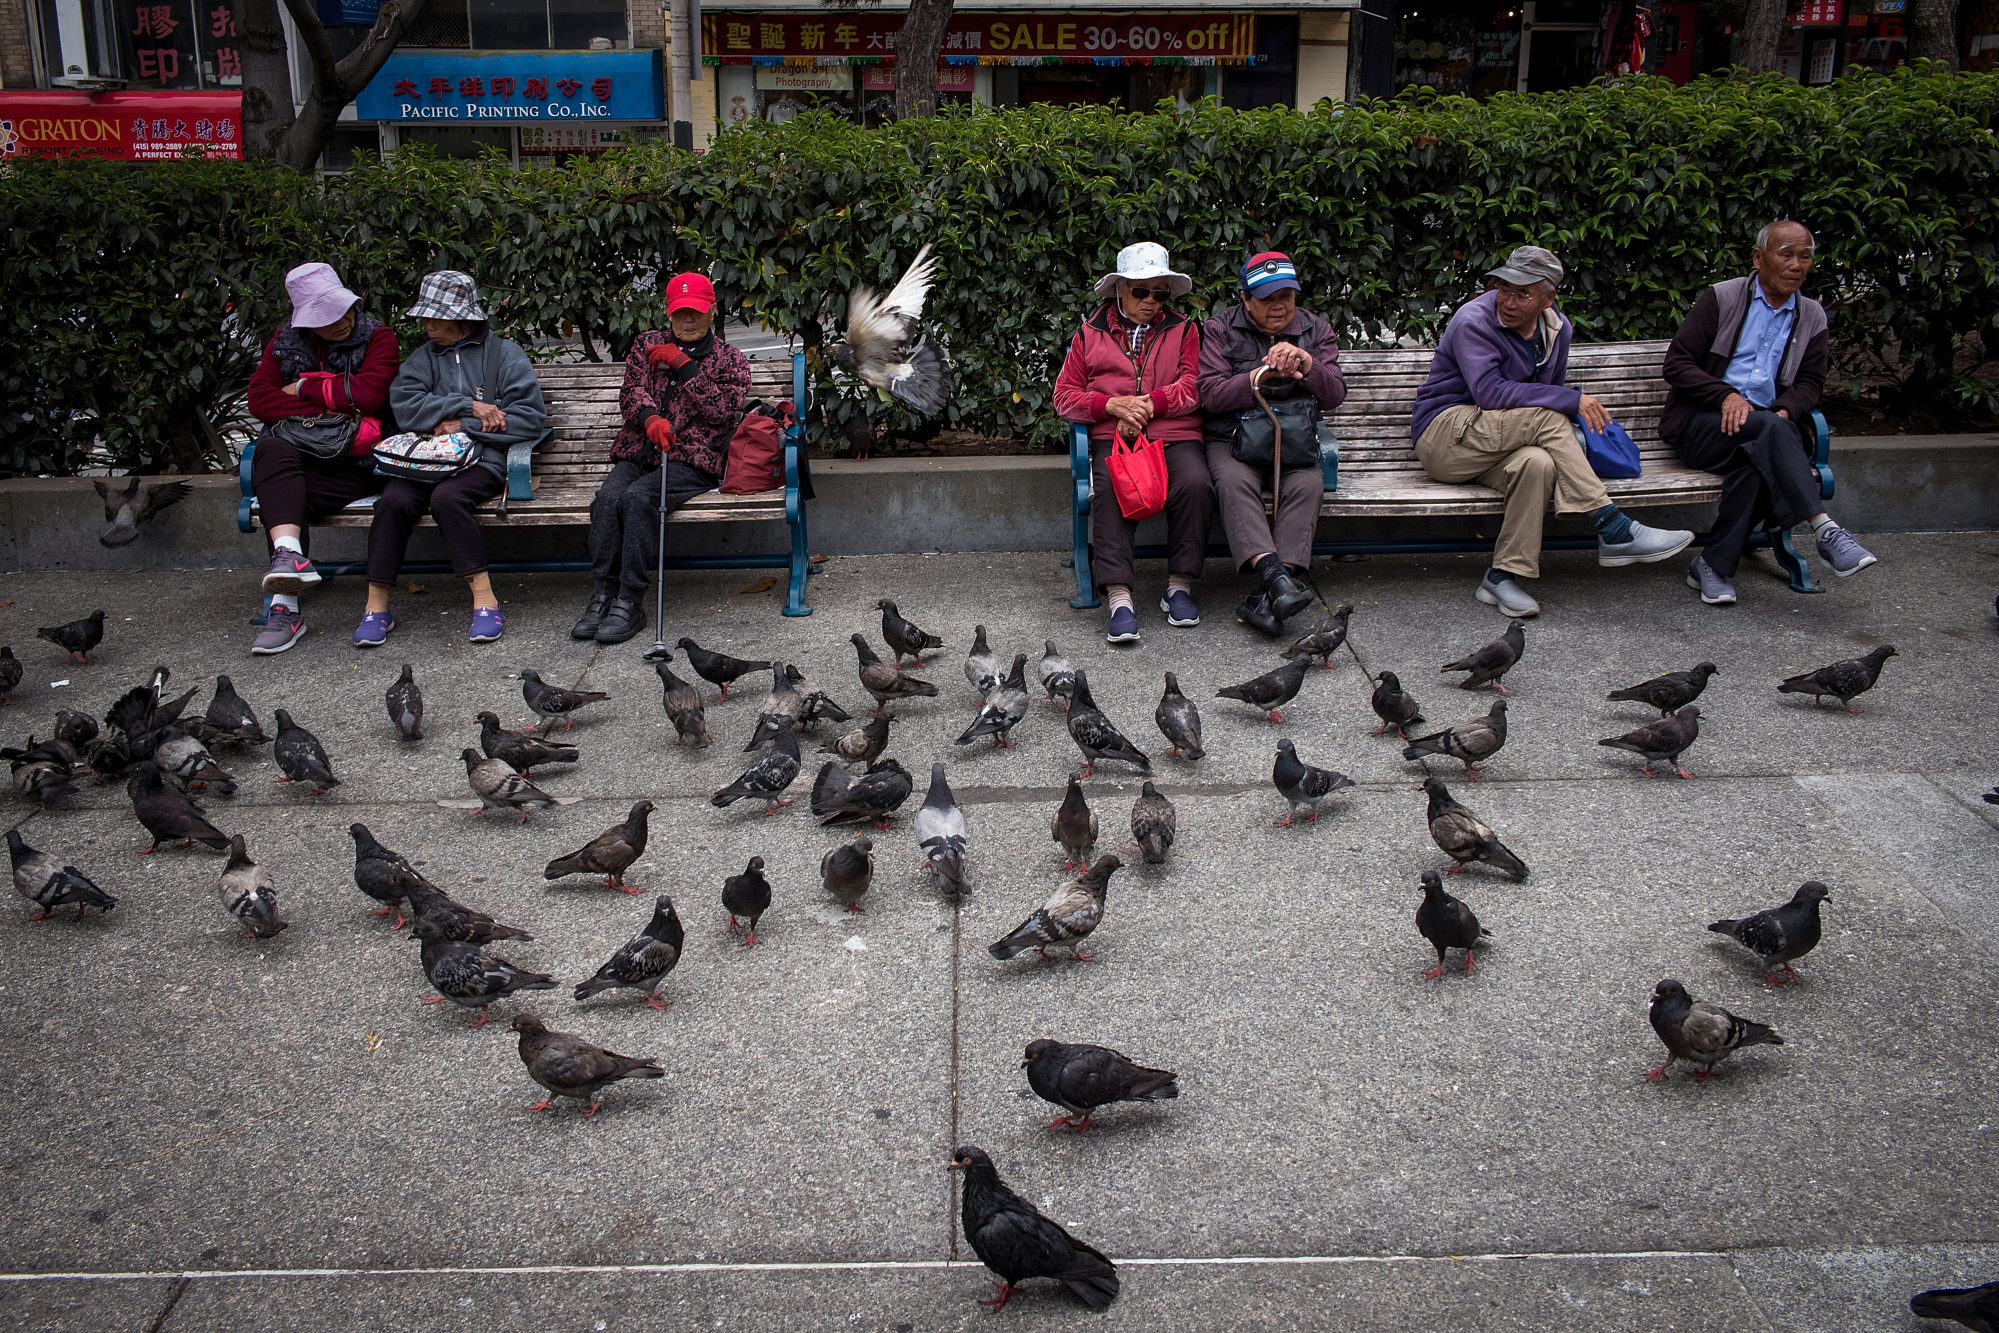 Elderly people sit on a bench in the Chinatown neighborhood of San Francisco, California.&nbsp;